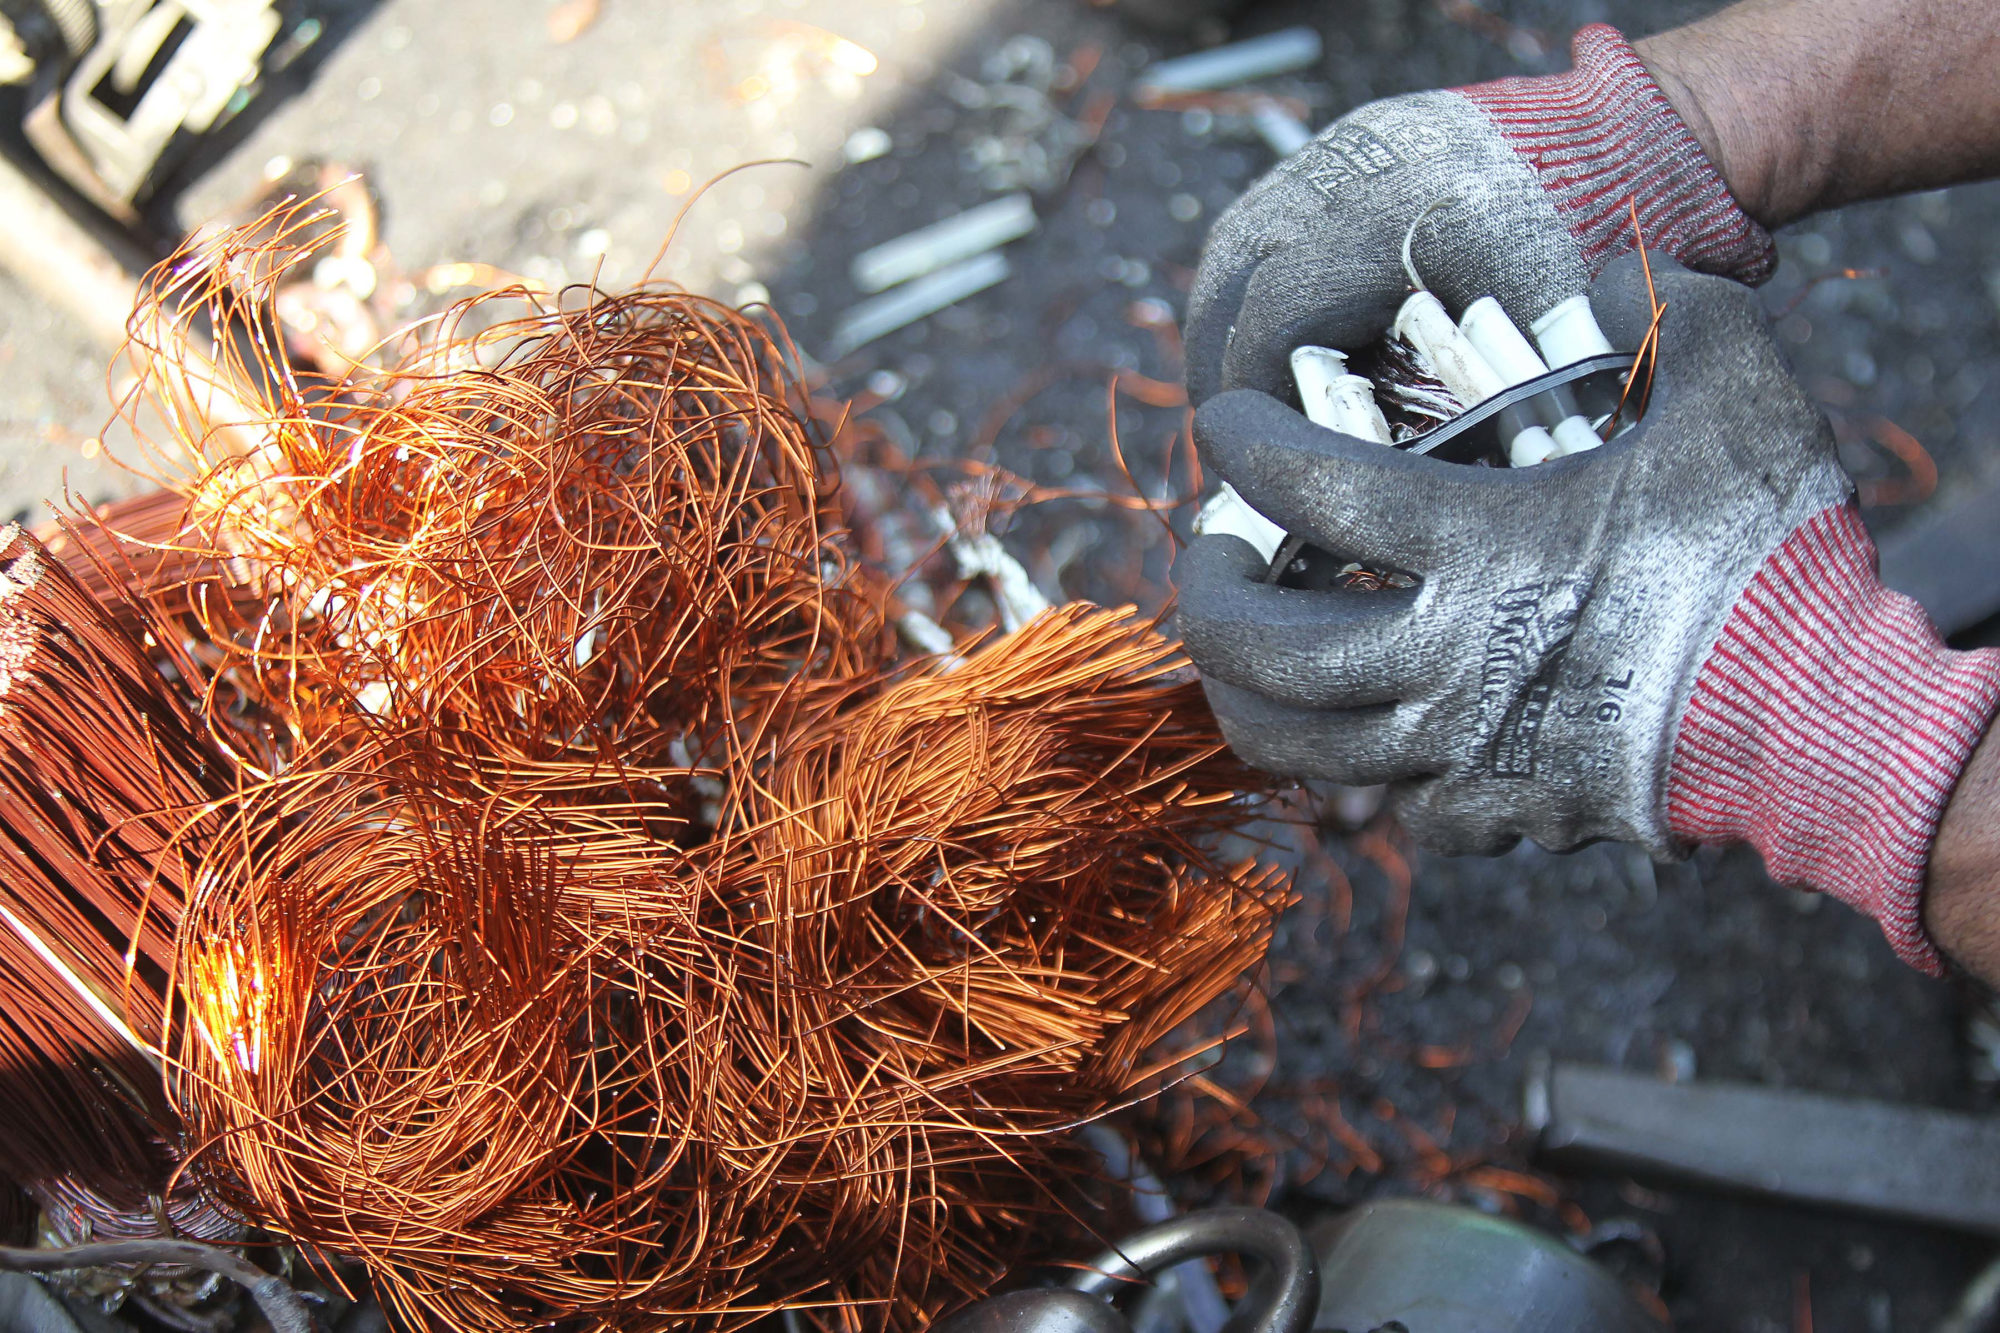 <p>Collecting copper wires from a dismantled washing machine in the Philippines (Image: <a tabindex="-1" href="https://media.greenpeace.org/archive/Electronic-Waste-Worker-in-Manila-27MZIFJJTQ5AG.html">Greenpeace</a>)</p>